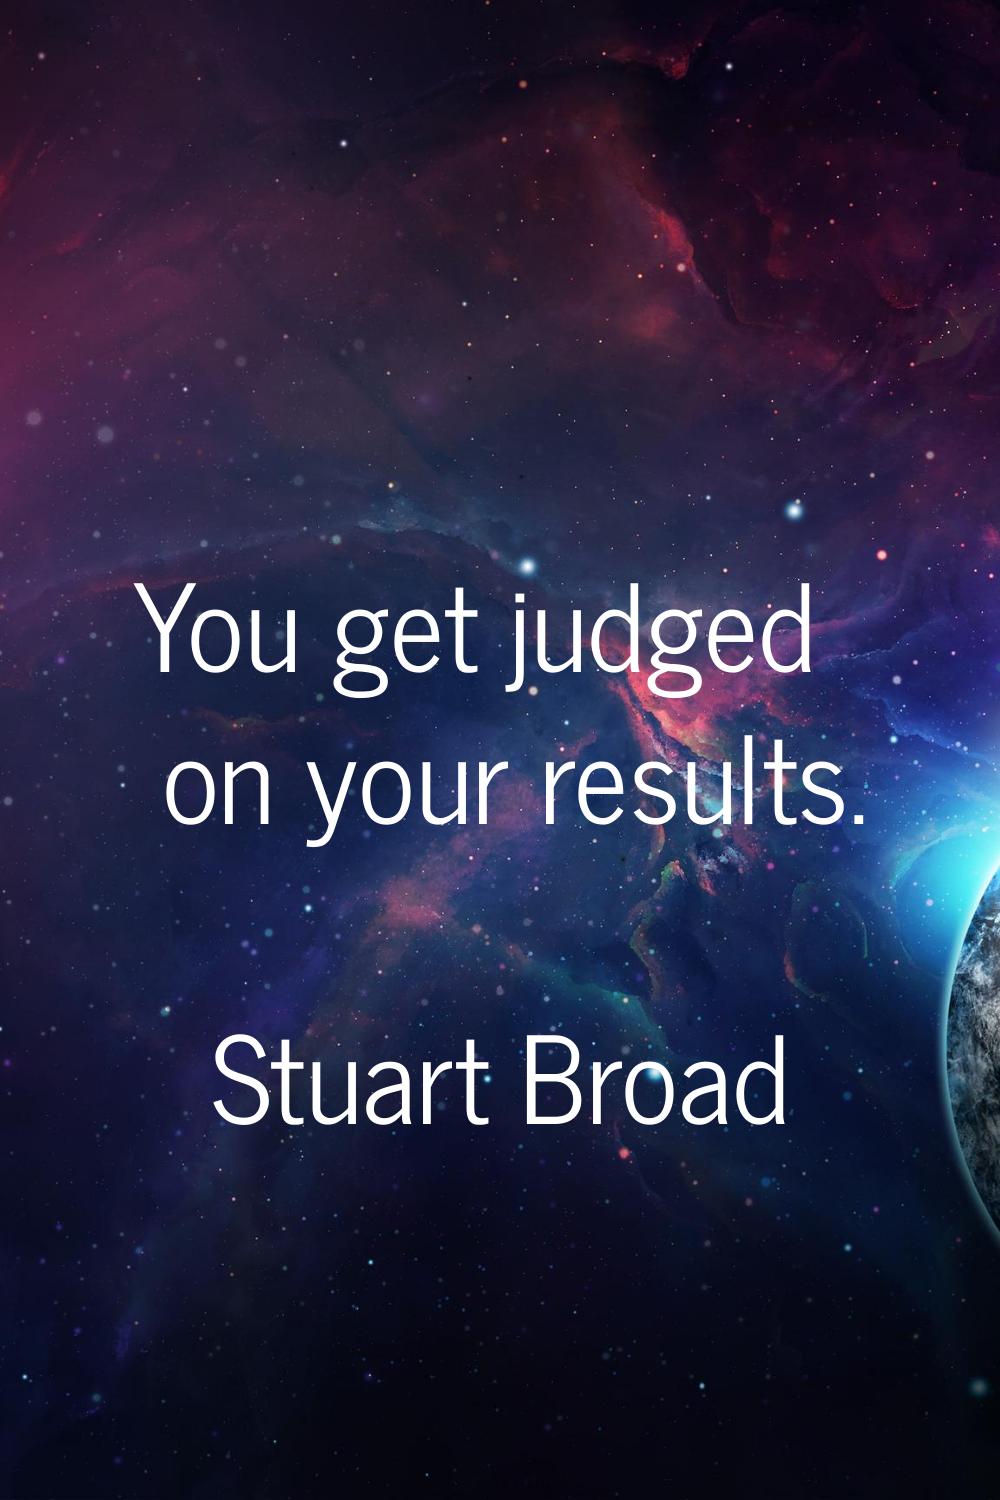 You get judged on your results.